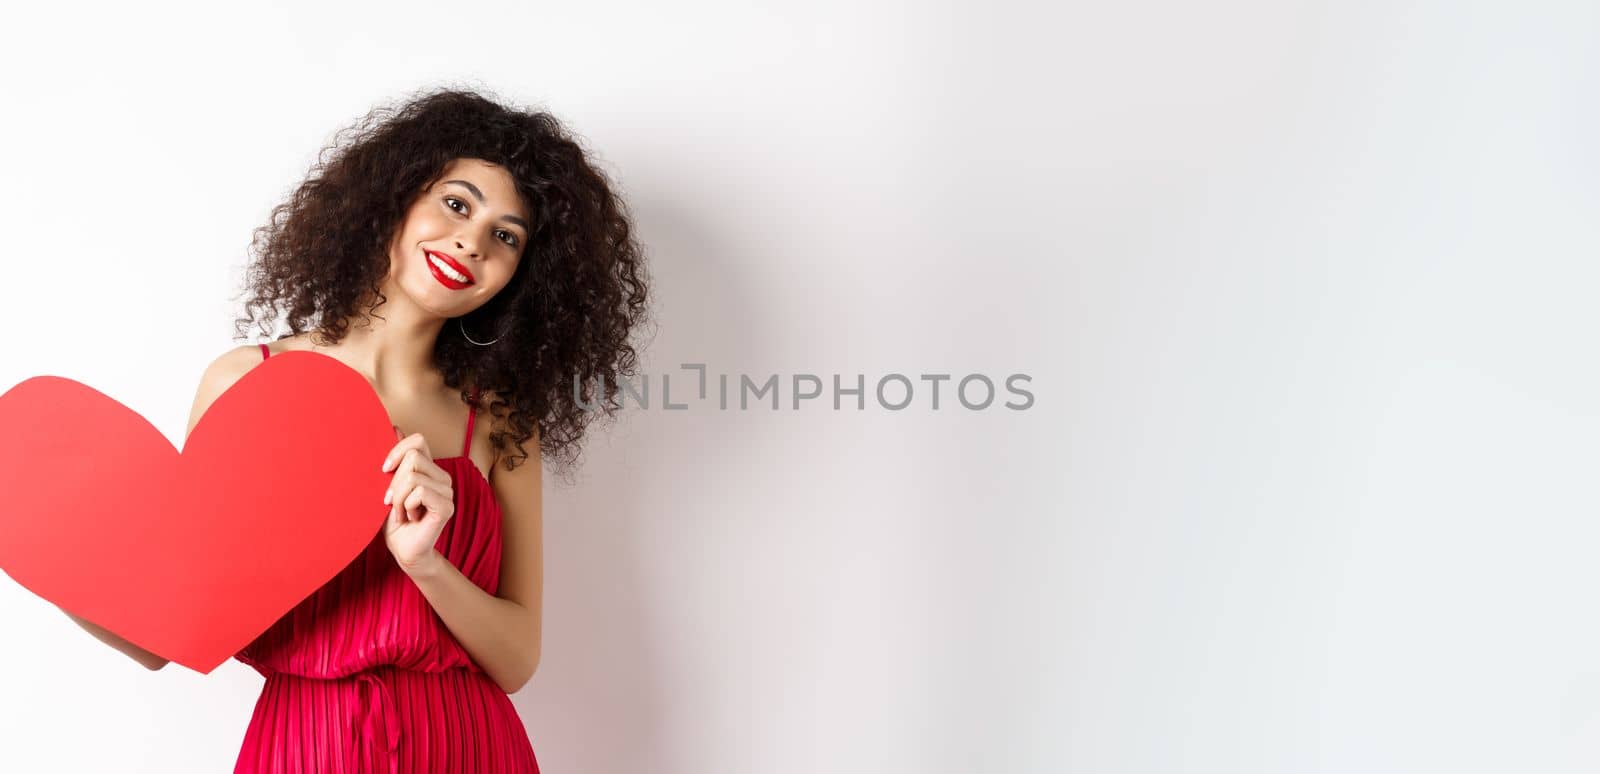 Romantic woman in dress showing big red heart, falling in love, smiling happy at camera, white background.